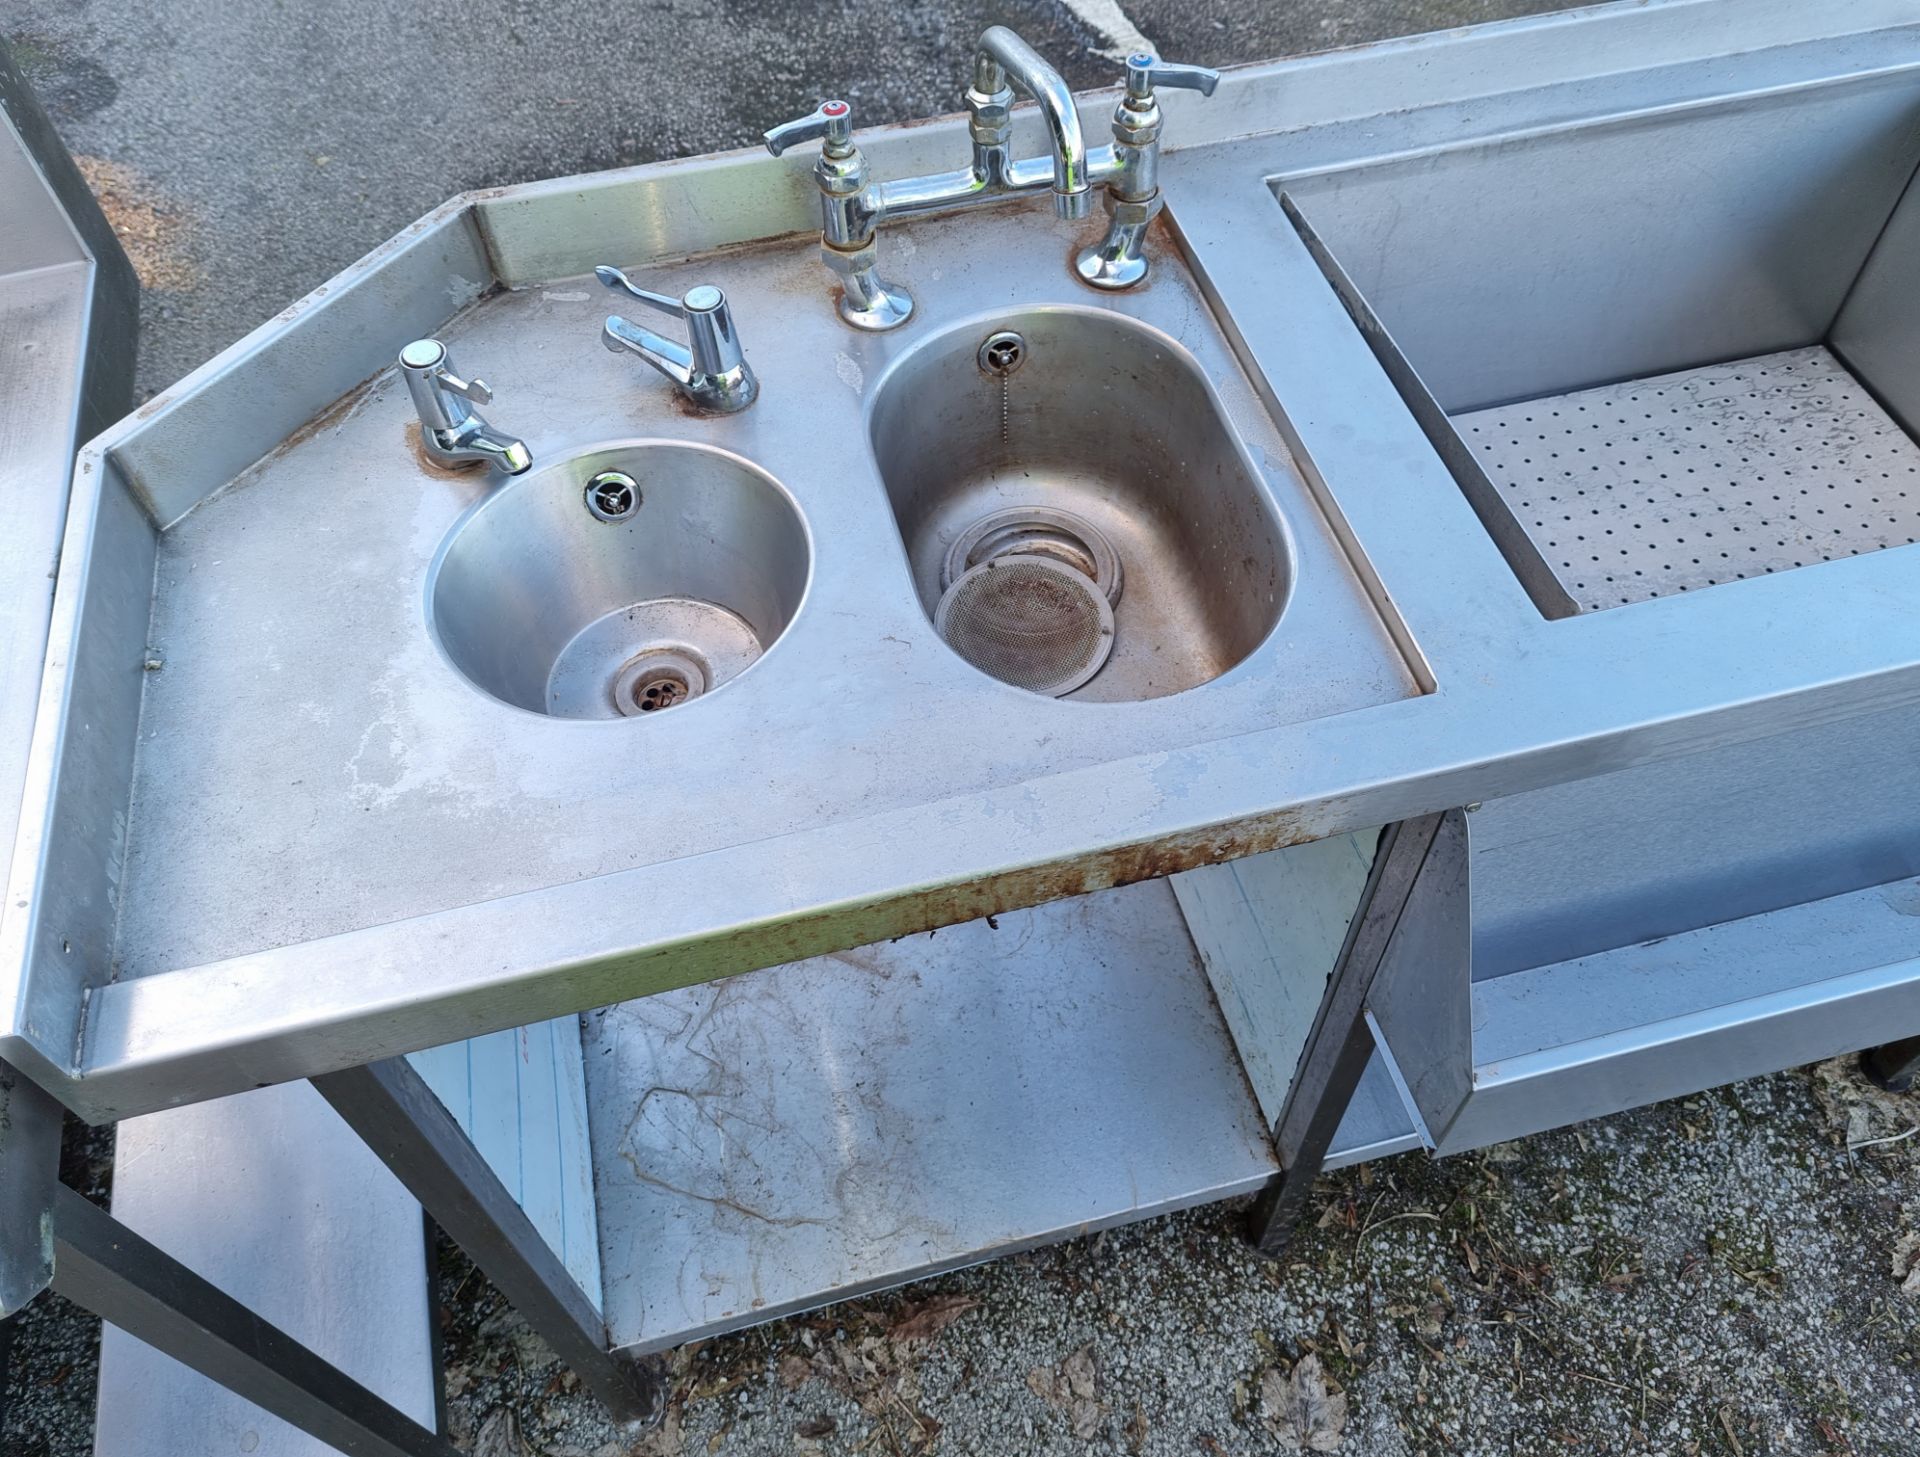 Stainless steel large multifunction wash table with double basin/sink - L2930 x D700 x H950mm - Image 4 of 4